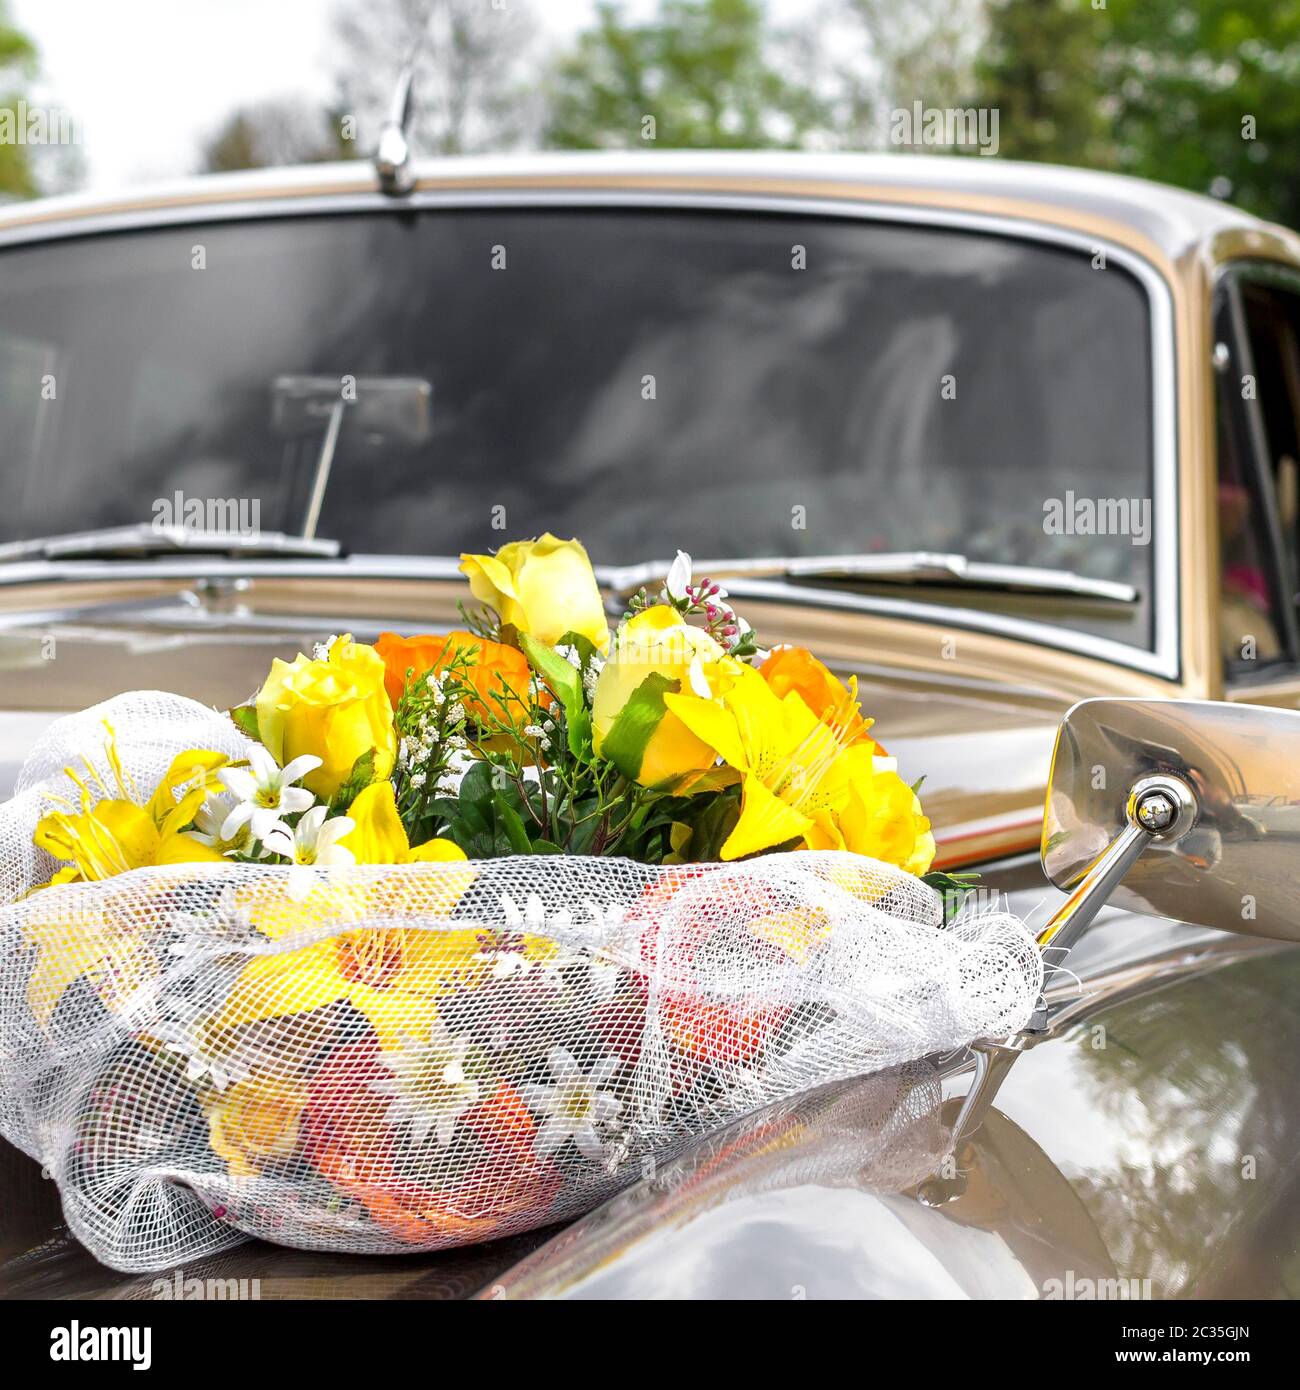 Inspiration Antique car flower baskets classic flowers with Best Inspiration